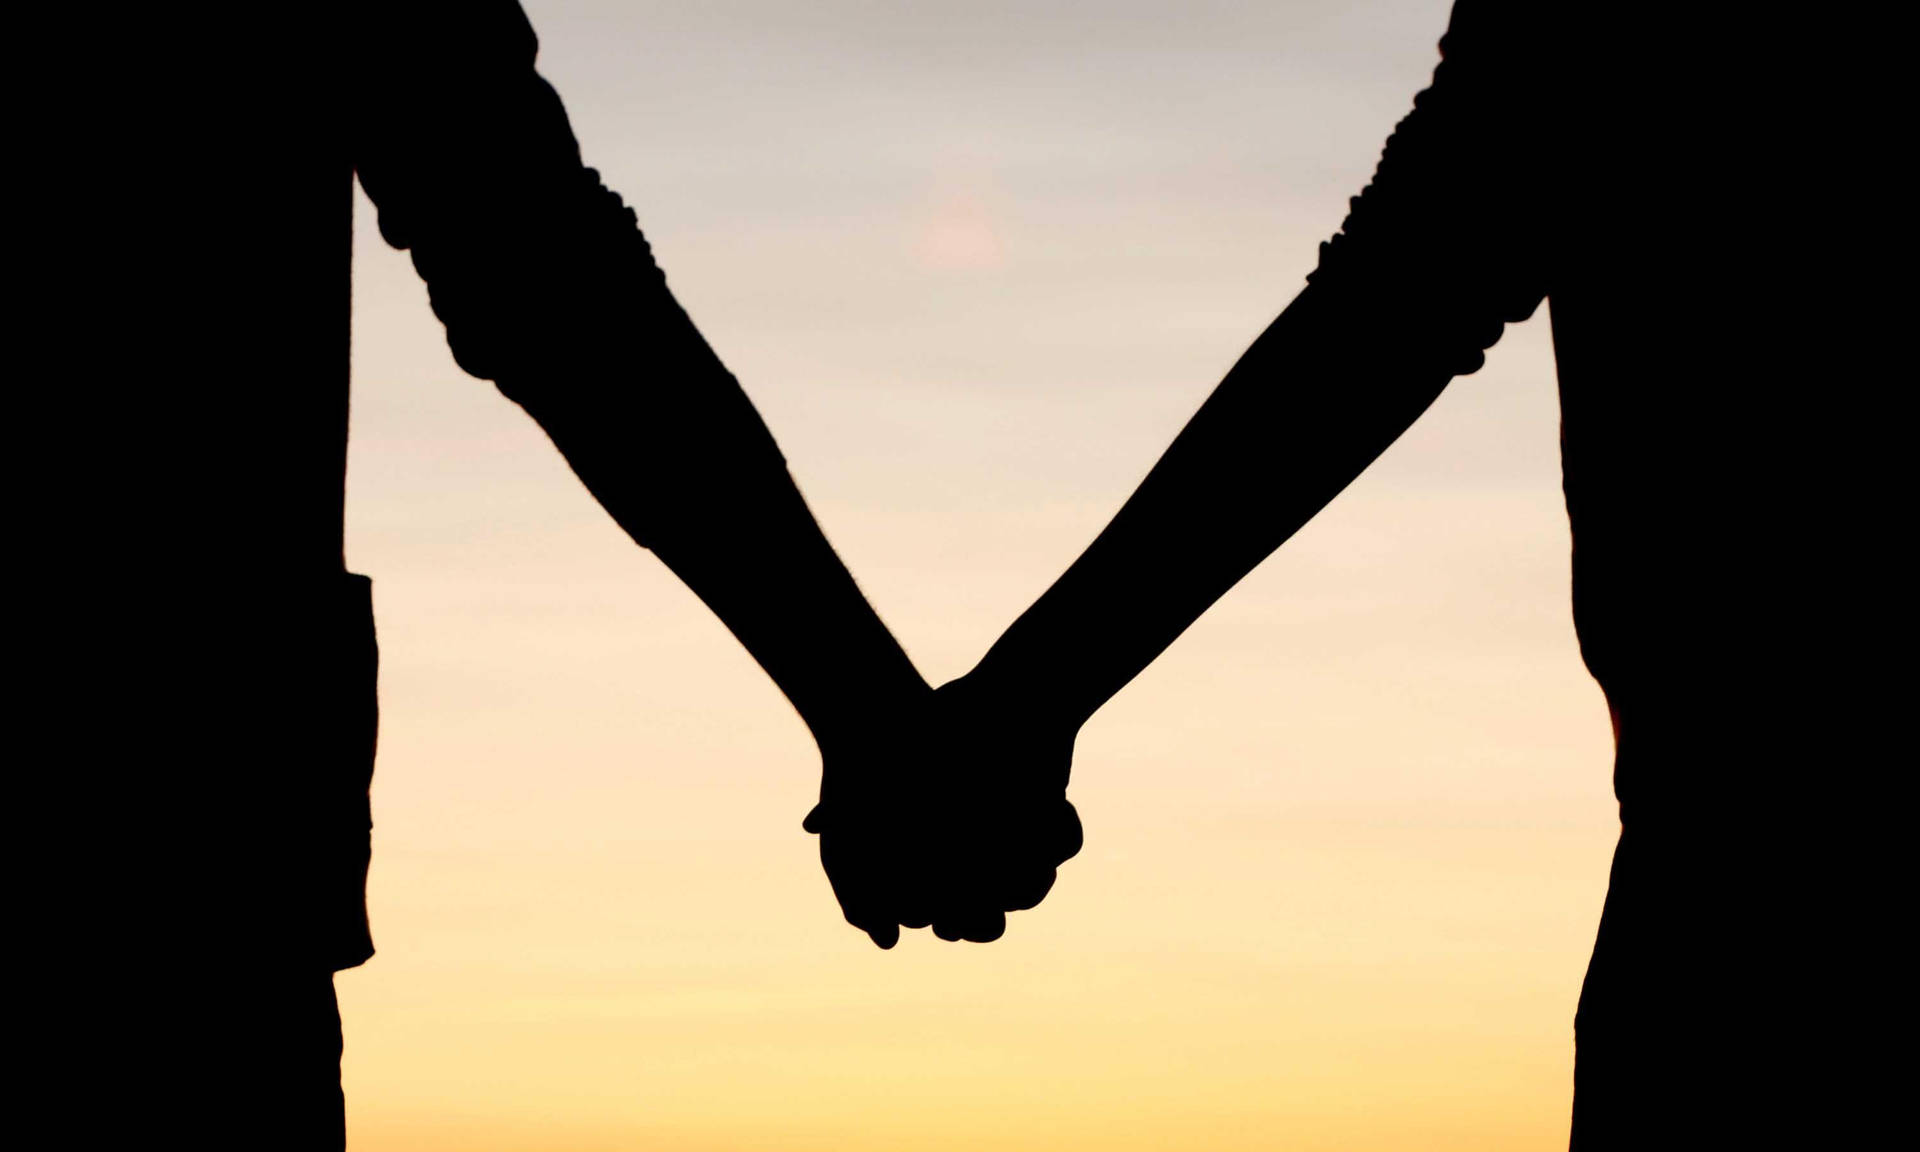 Couple Holding Hands Silhouette Sunset Sky